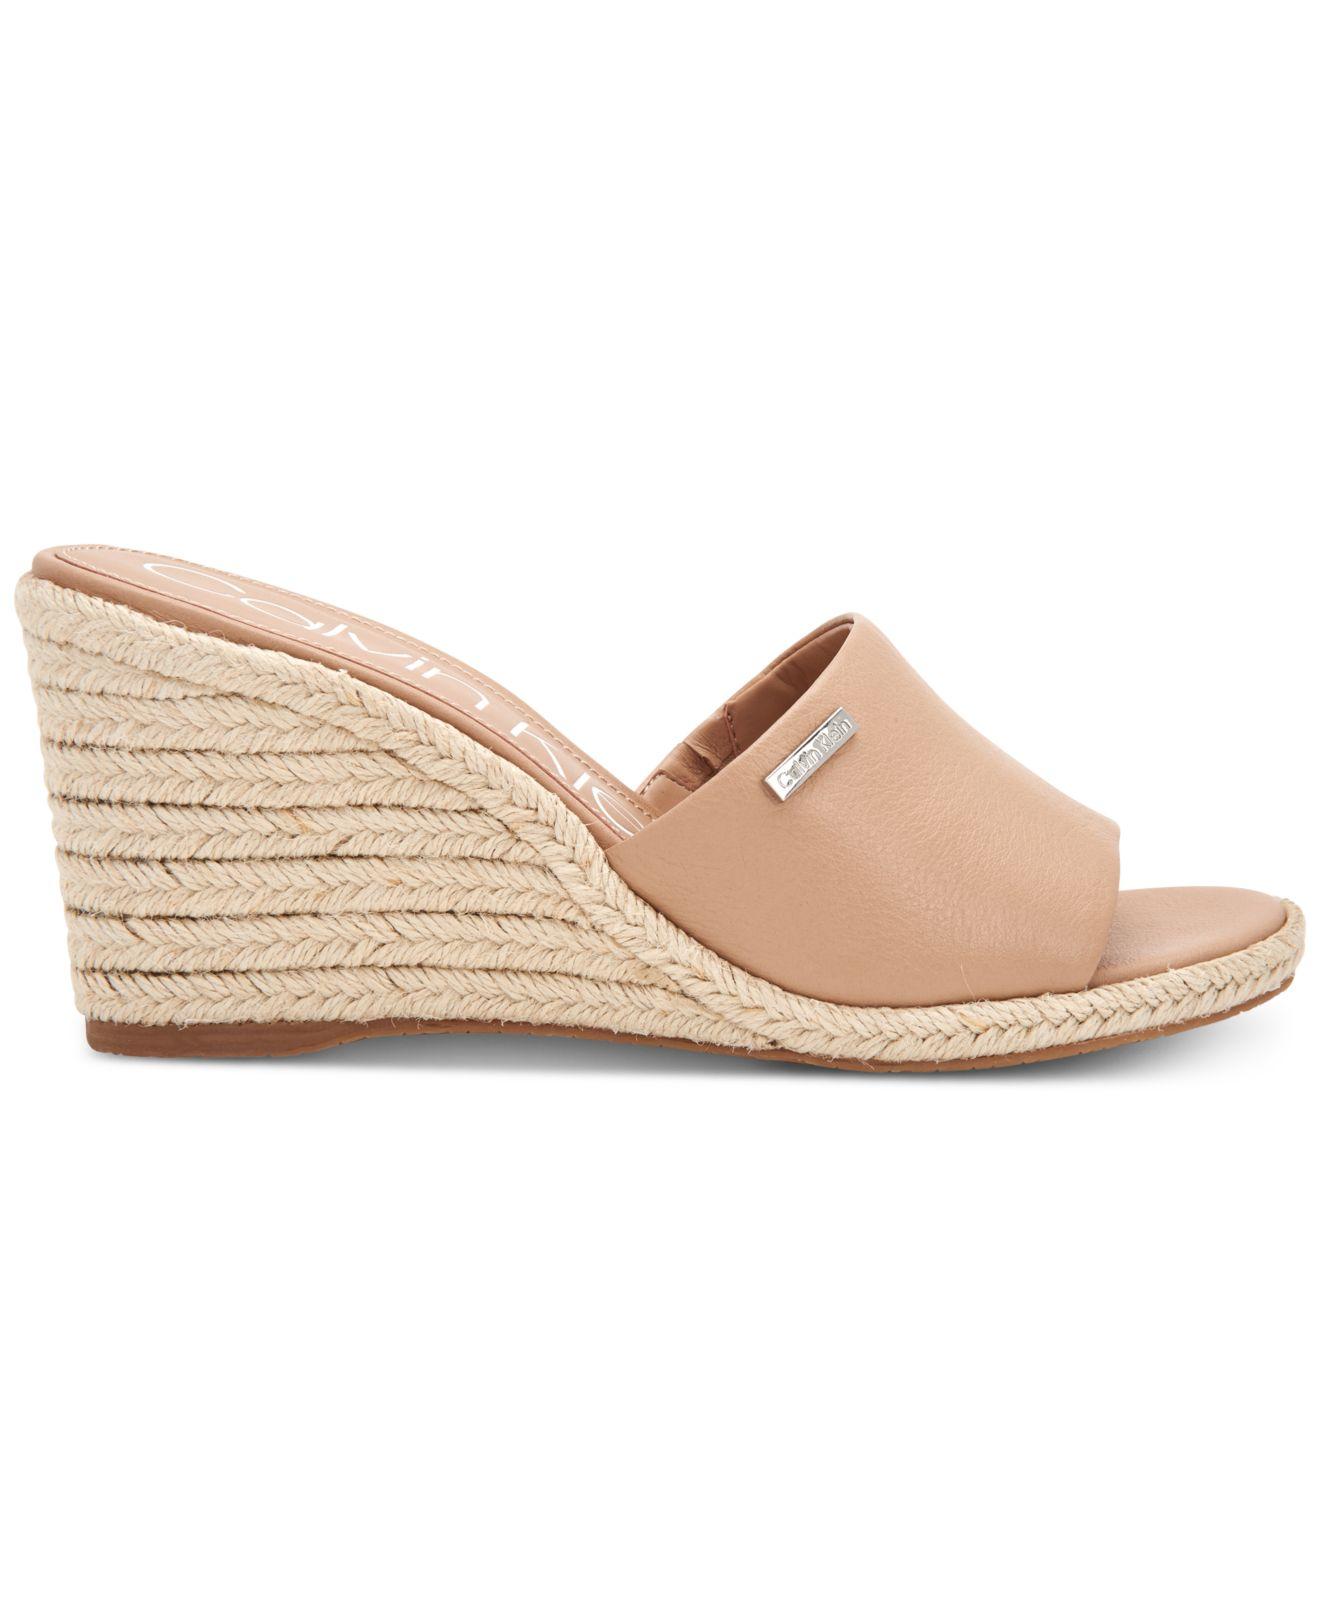 Calvin Klein Britta Wedge Sandals, Created For Macy's in Natural | Lyst